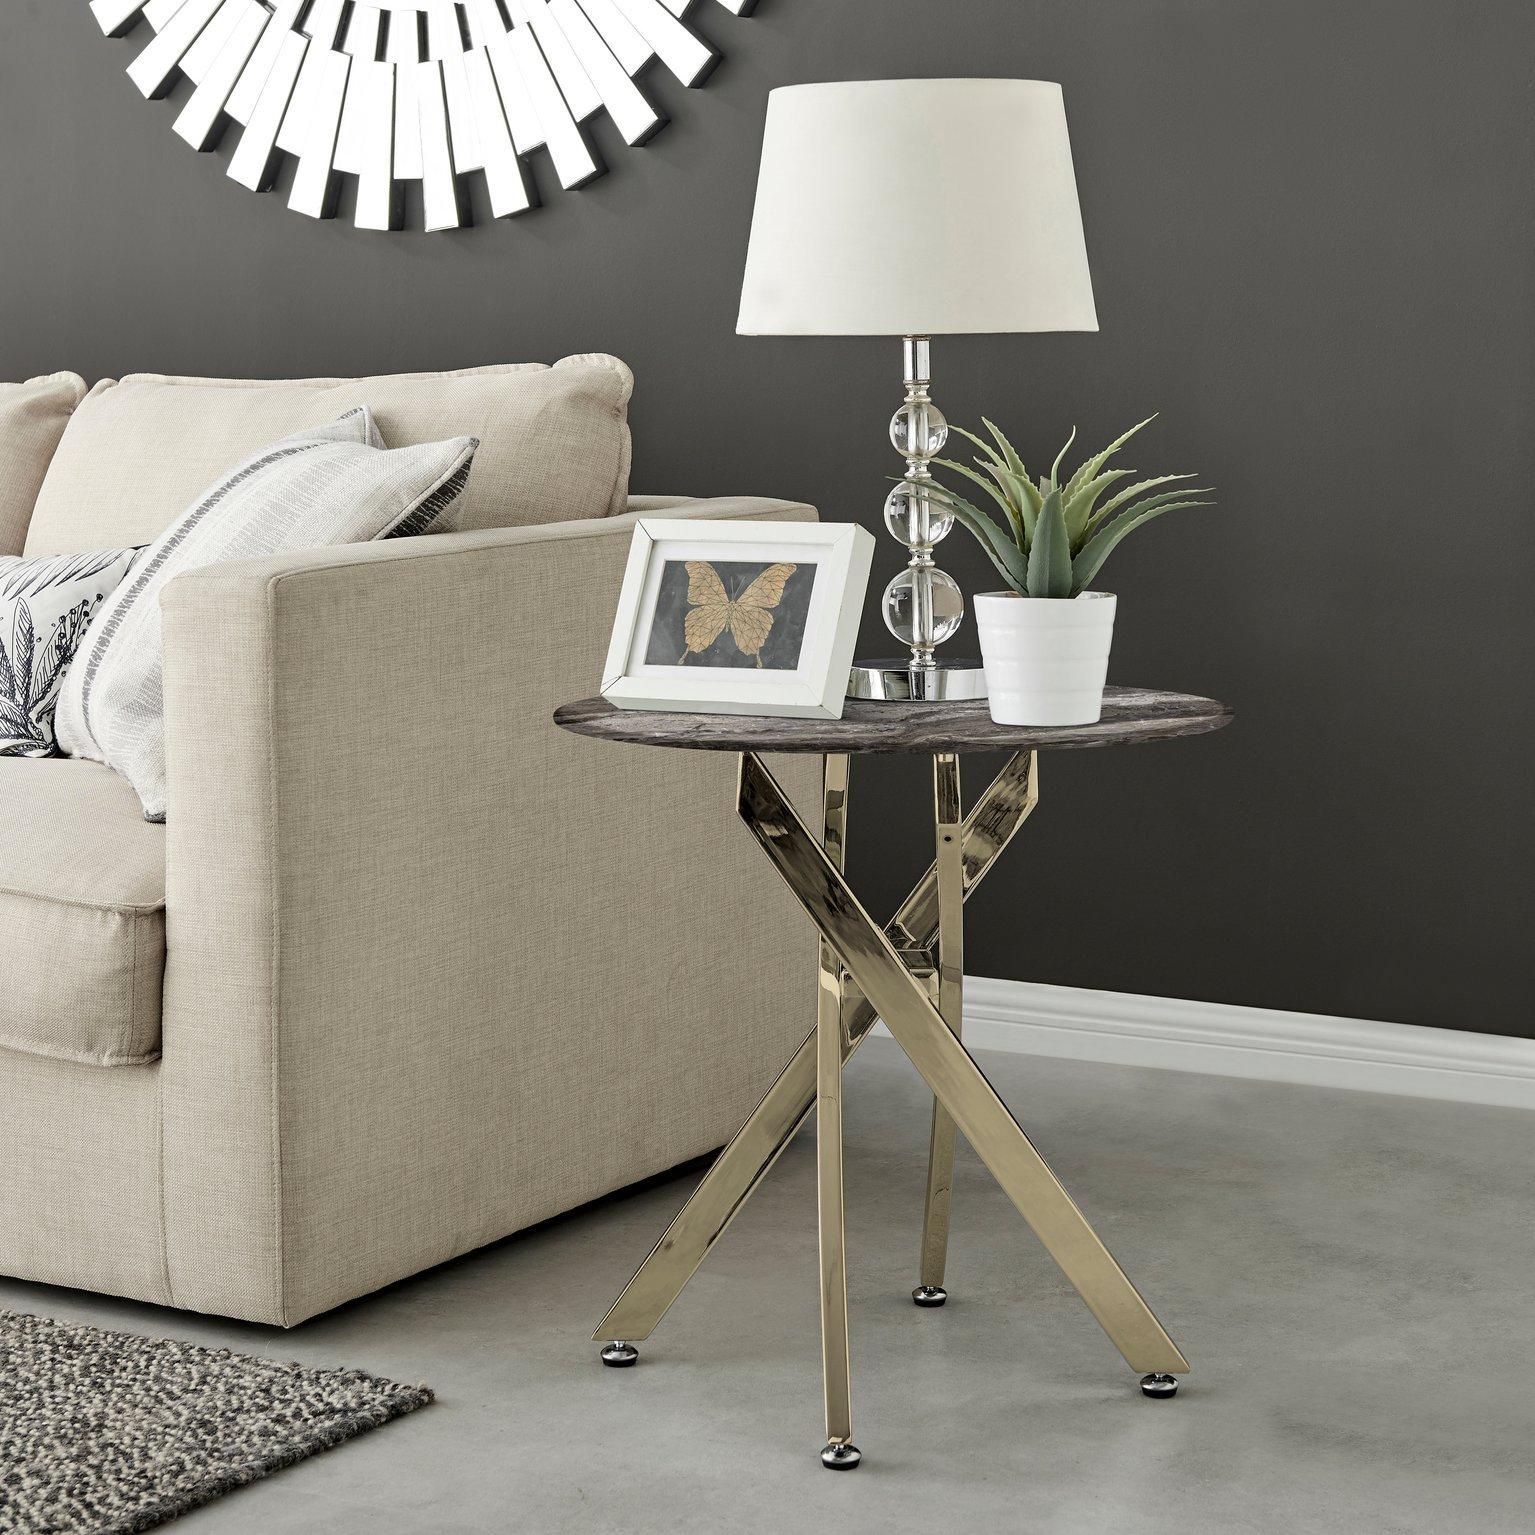 Novara Round Marble Effect Glass Top Side Table With Gold Metal Starburst Legs